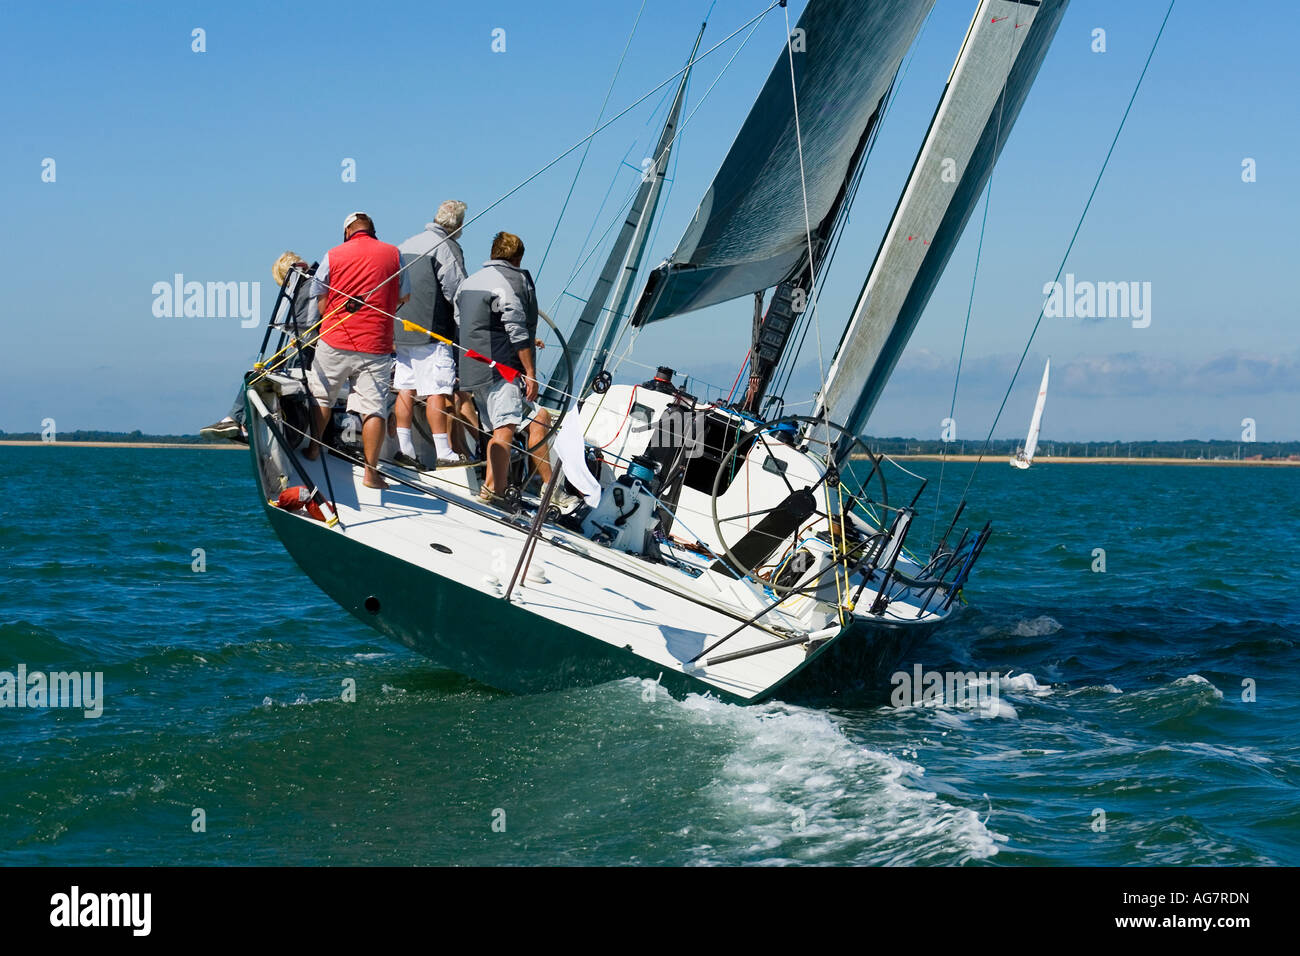 A racing yacht trying to catch up with the other boats in the race Stock Photo